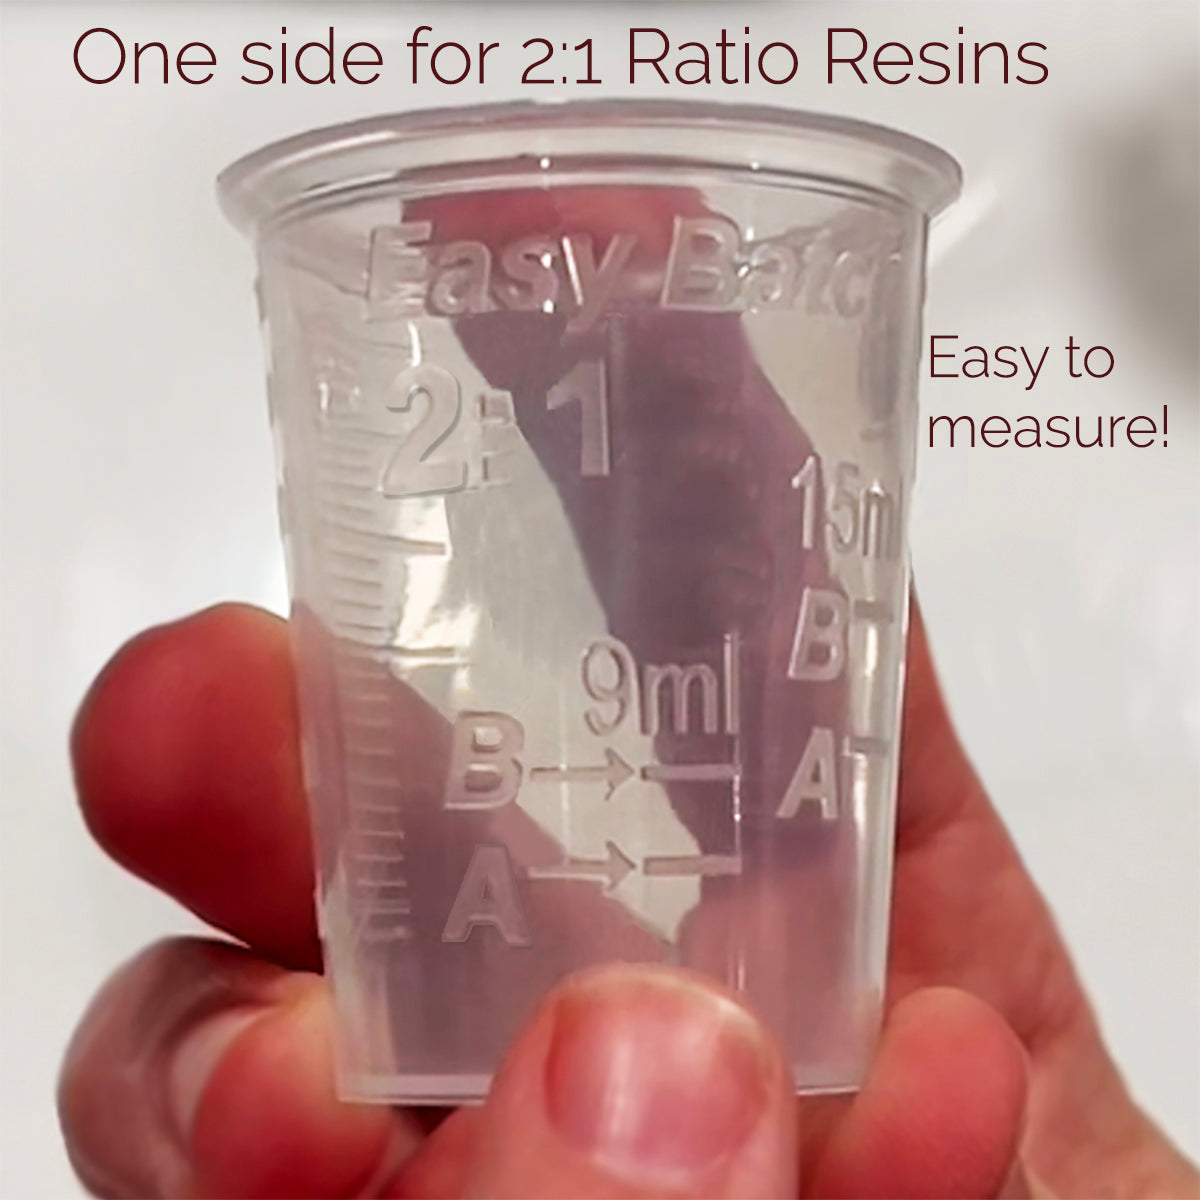 Resin Supplies - Measure & Mix Cups 2 oz. – Little Windows Brilliant Resin  and Supplies